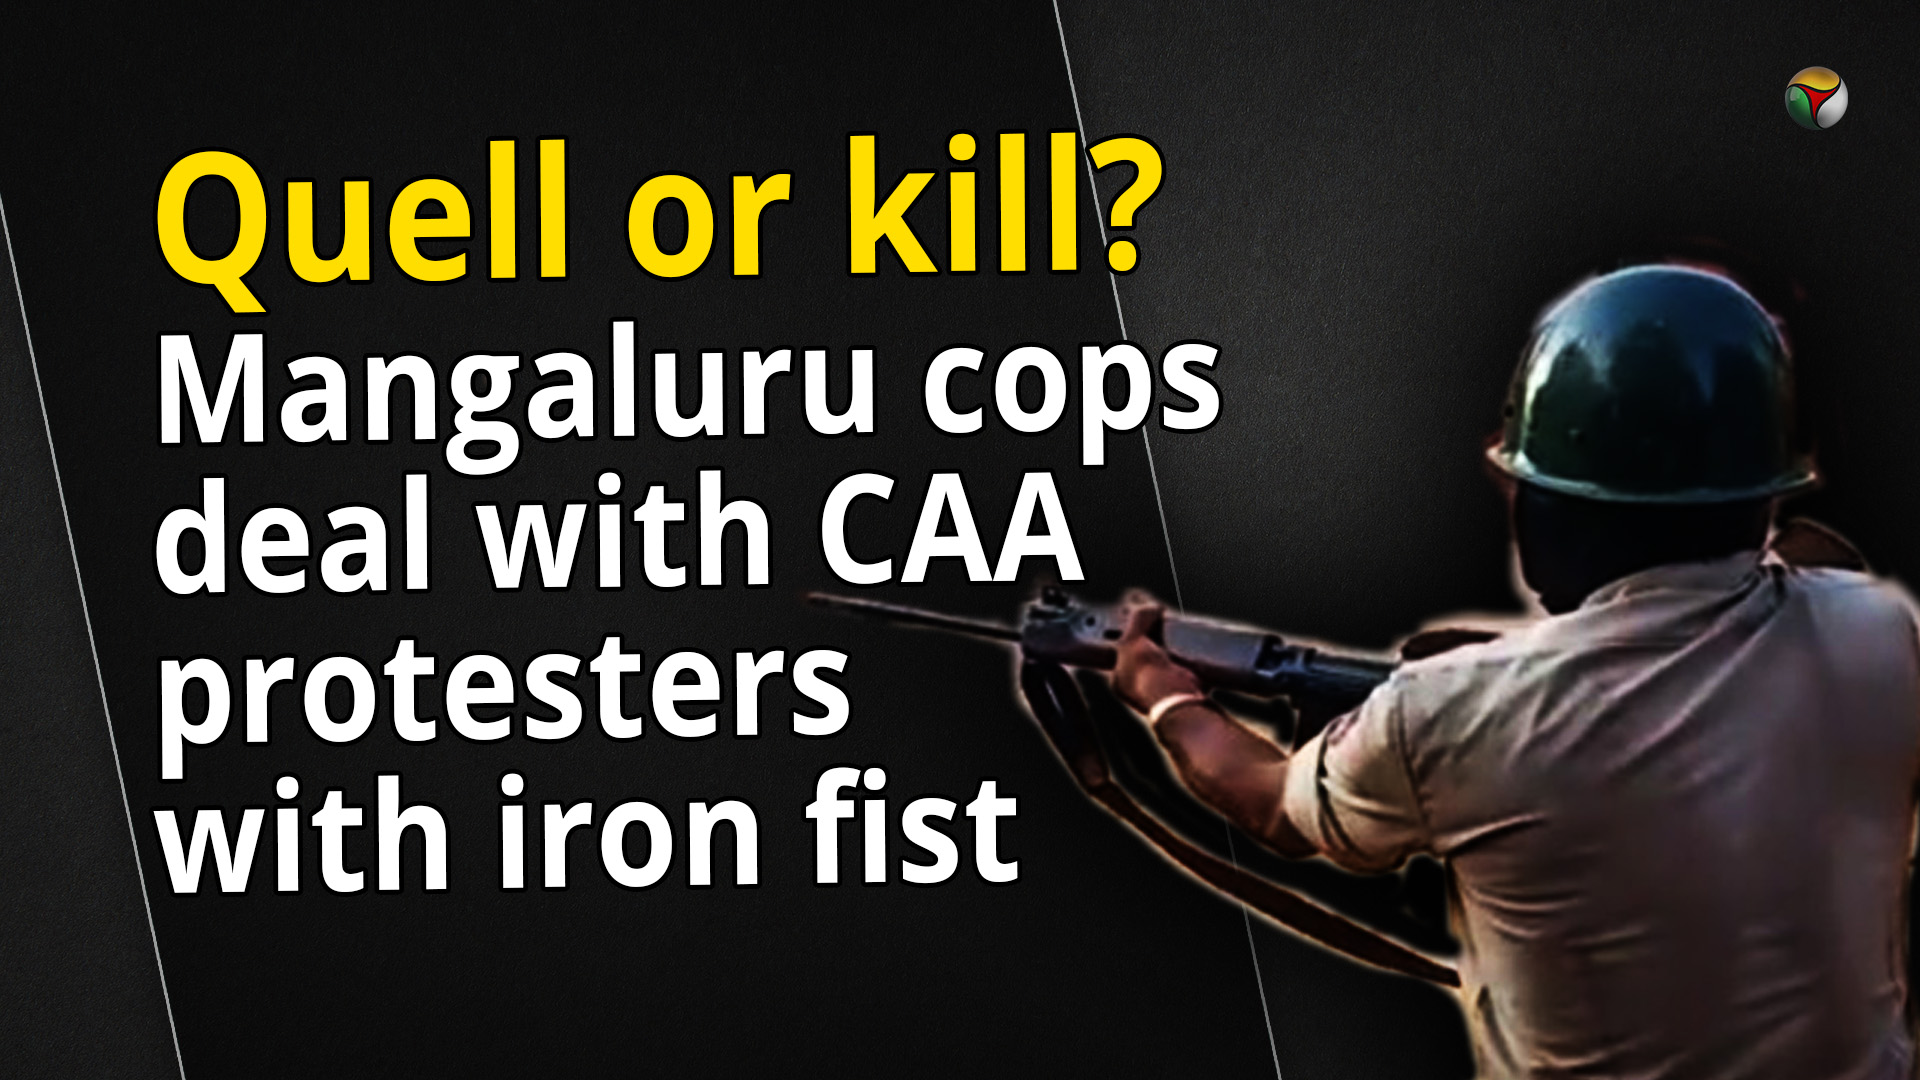 Quell or kill? Mangaluru cops deal with CAA protesters with iron fist